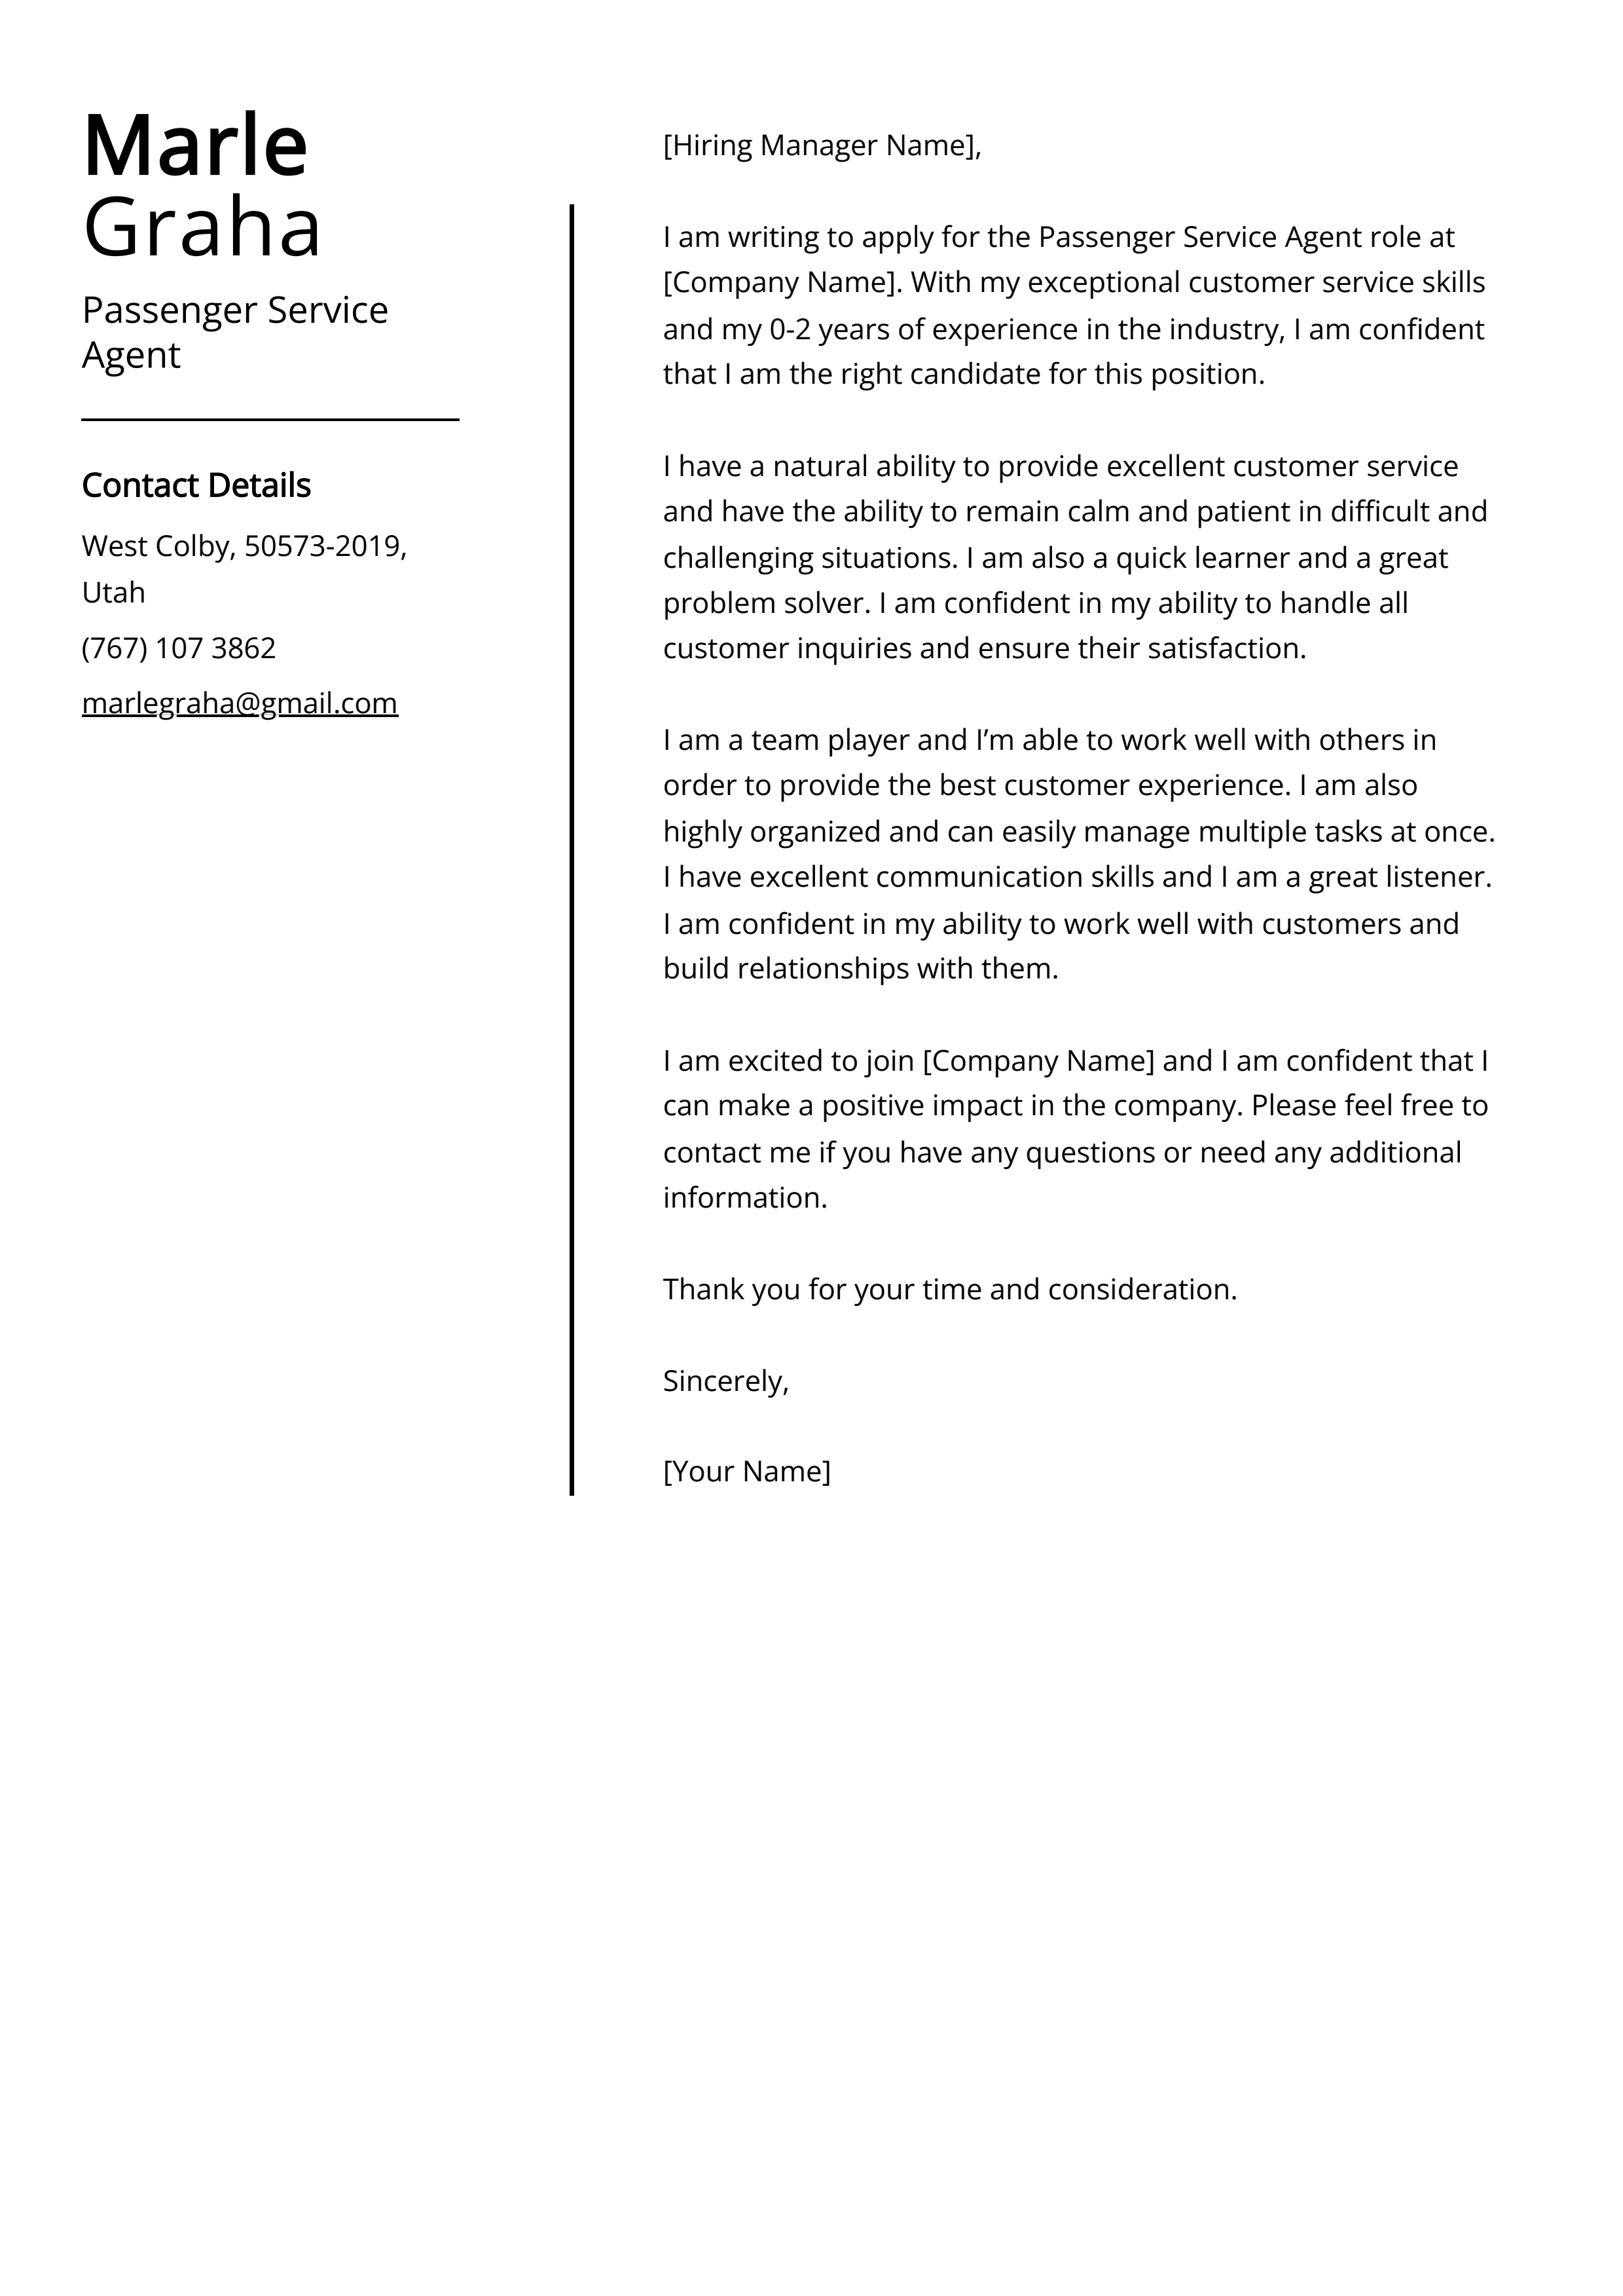 Passenger Service Agent Cover Letter Example